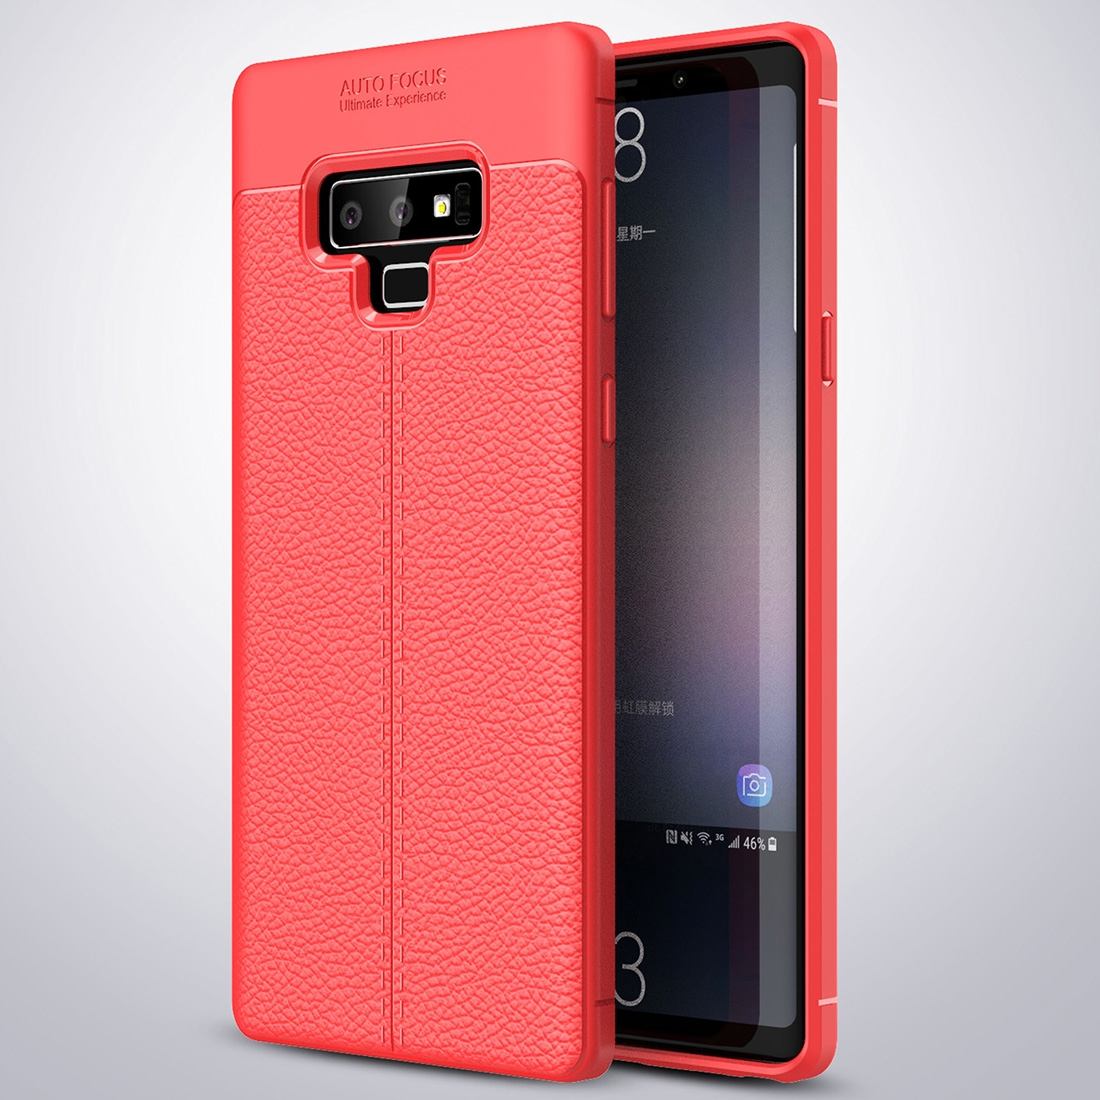 For Samsung Galaxy Note 9 Case,TPU Shockproof Slim Back Mobile Phone Cover,Red